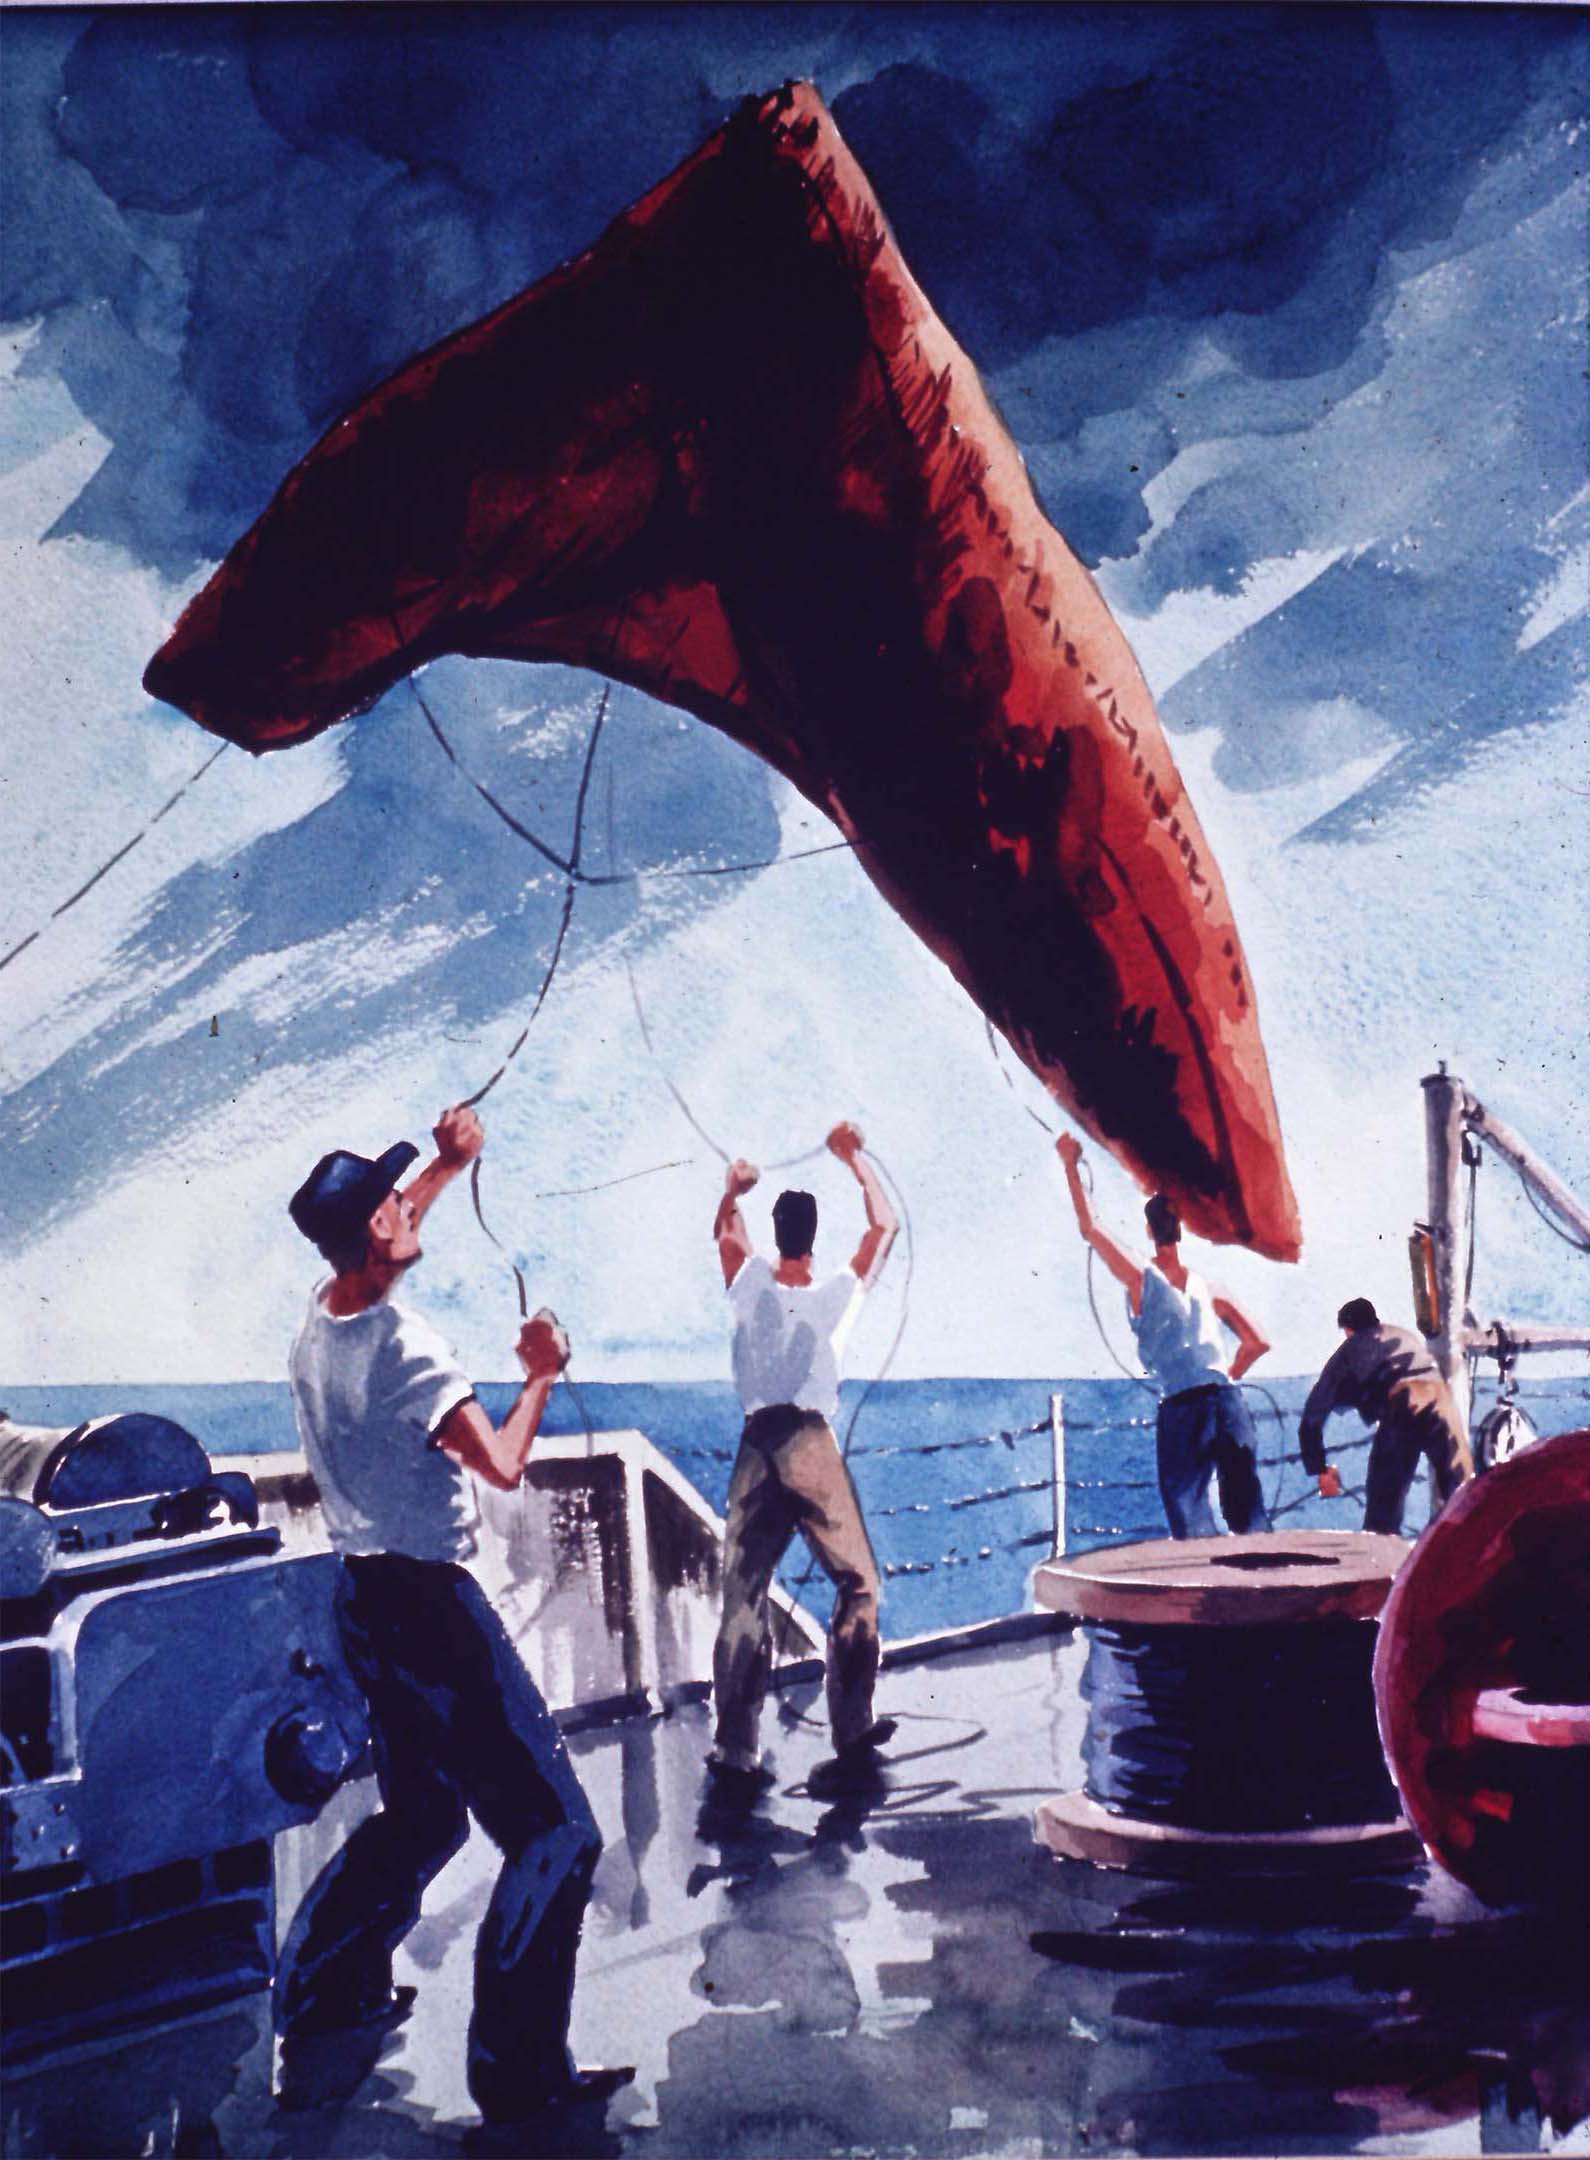 Jack Coggins Release of DART weather balloon from the deck of the NOAA ship DISCOVERER (watercolor). 35-mm color slide, 1969. Source: Harris B. Stewart